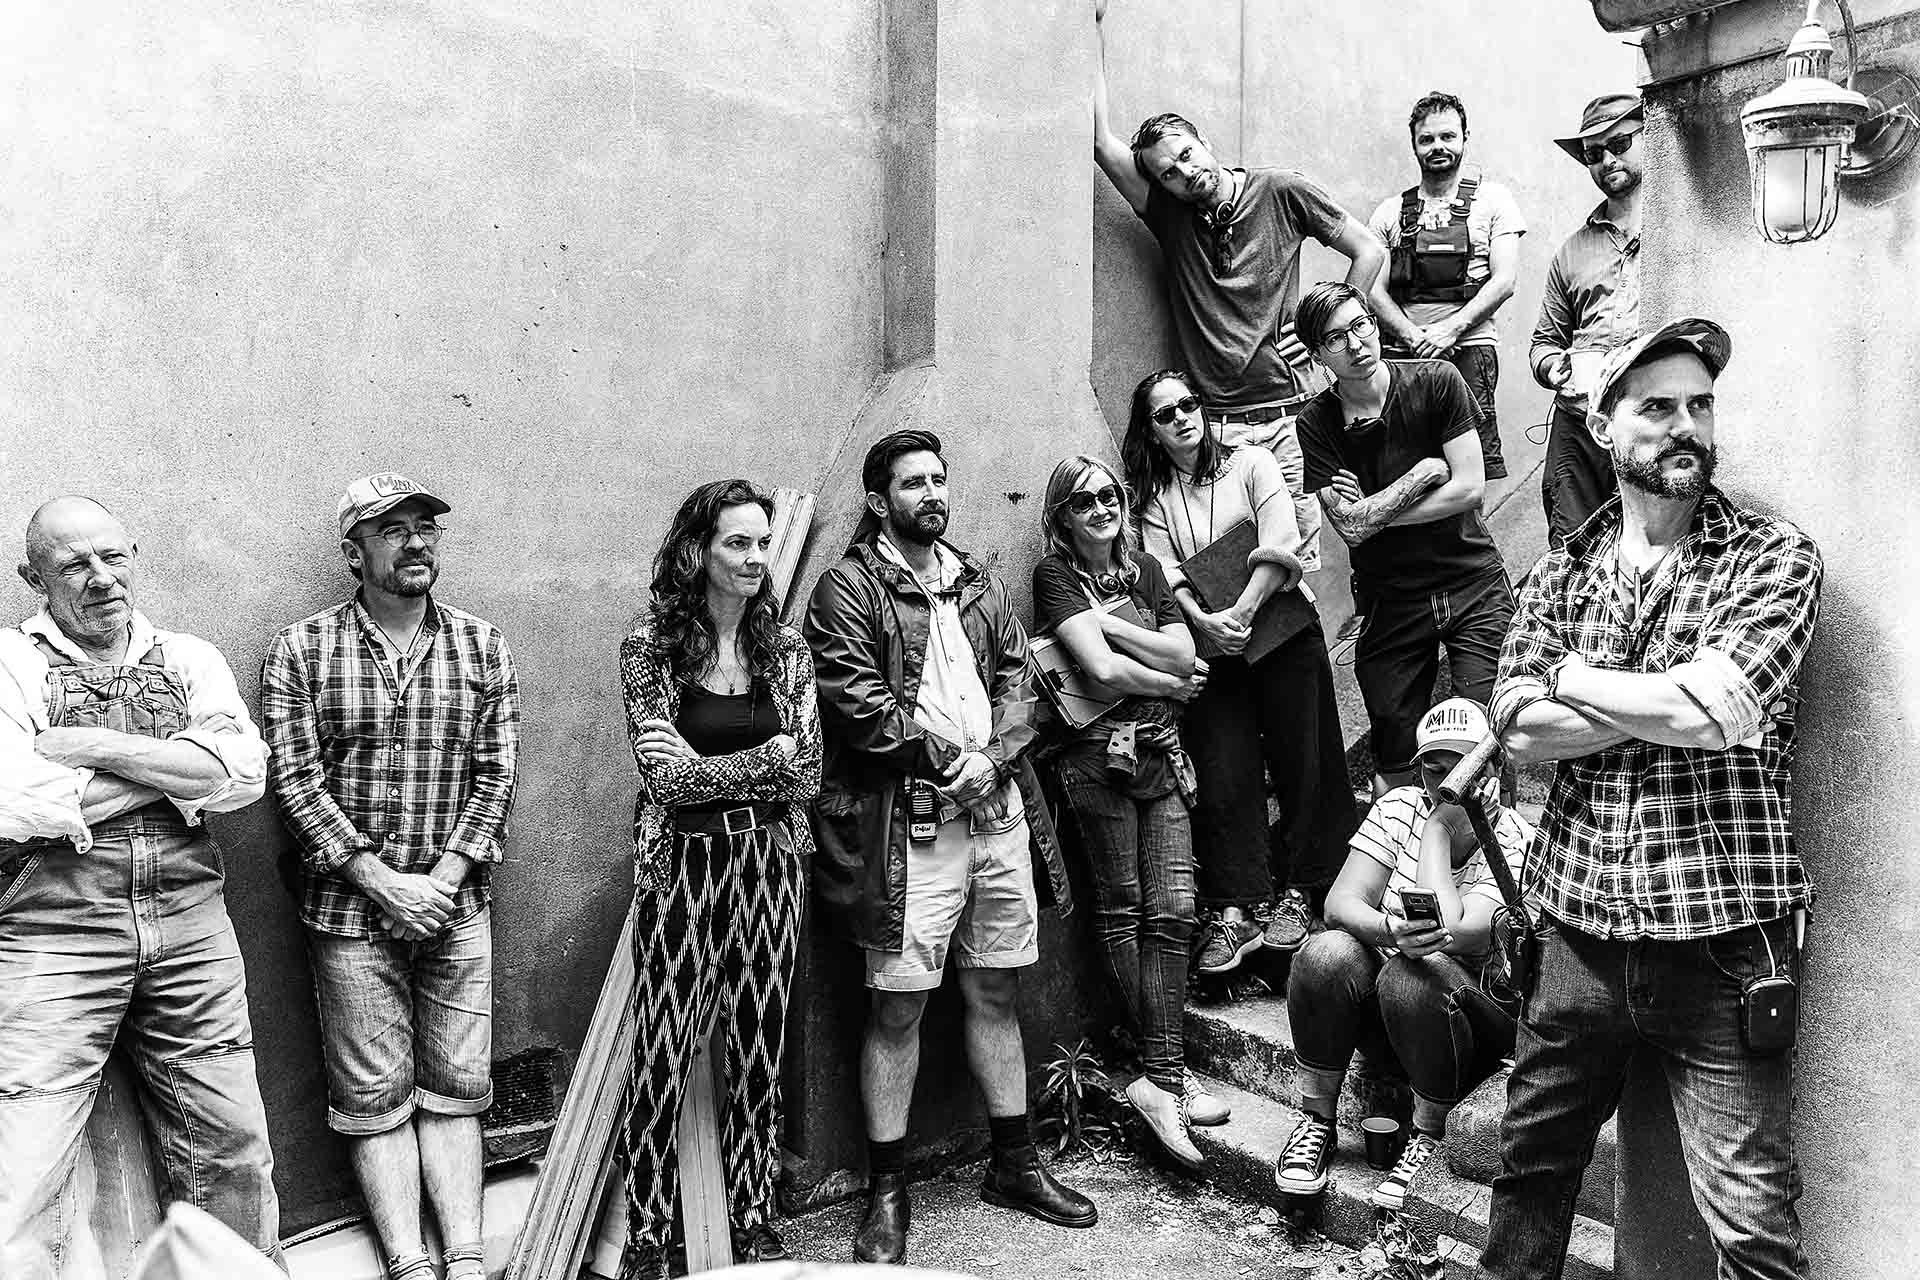 Behind the scenes crew photo of Reunion in black and white